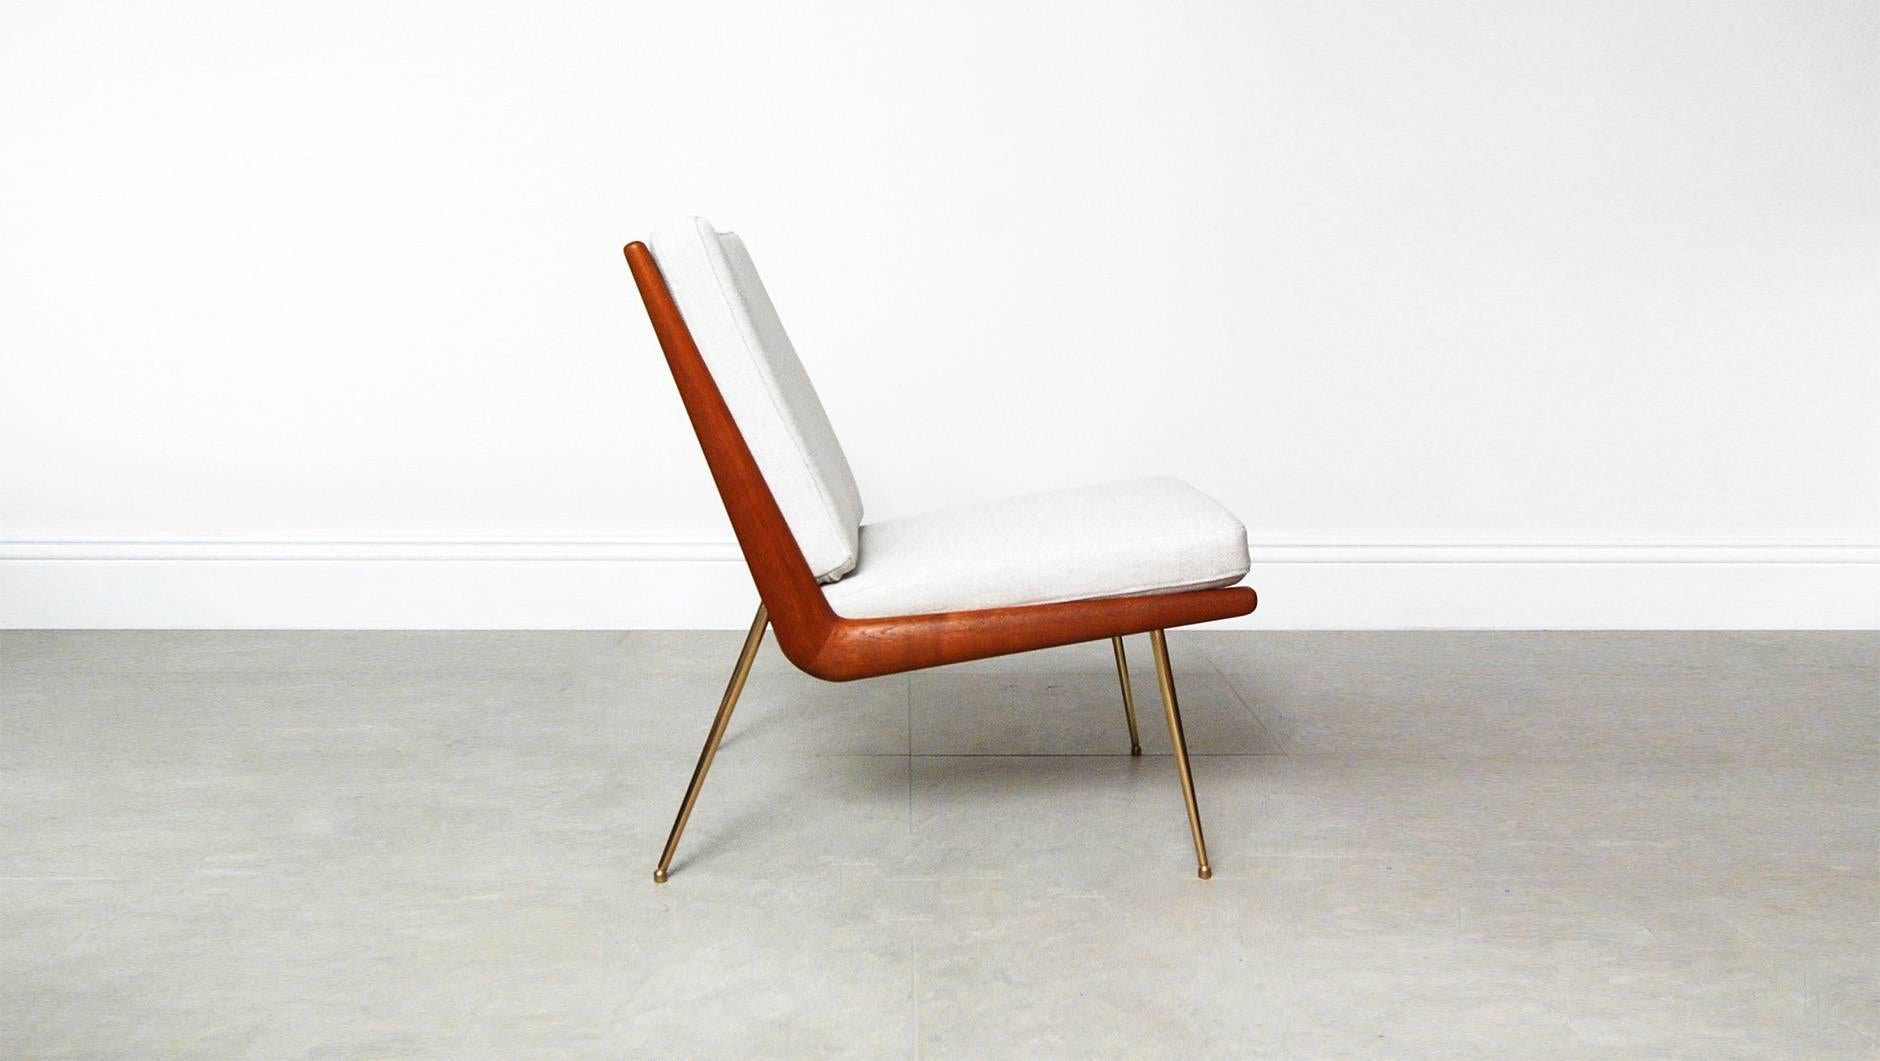 The Boomerang chair is probably Danish designer Peter Hvidt's finest moment. Combining Scandinavian and Italian mid-century design elements, the Boomerang is minimalist perfect.  The chair was designed in the late 50's and manufactured by France &